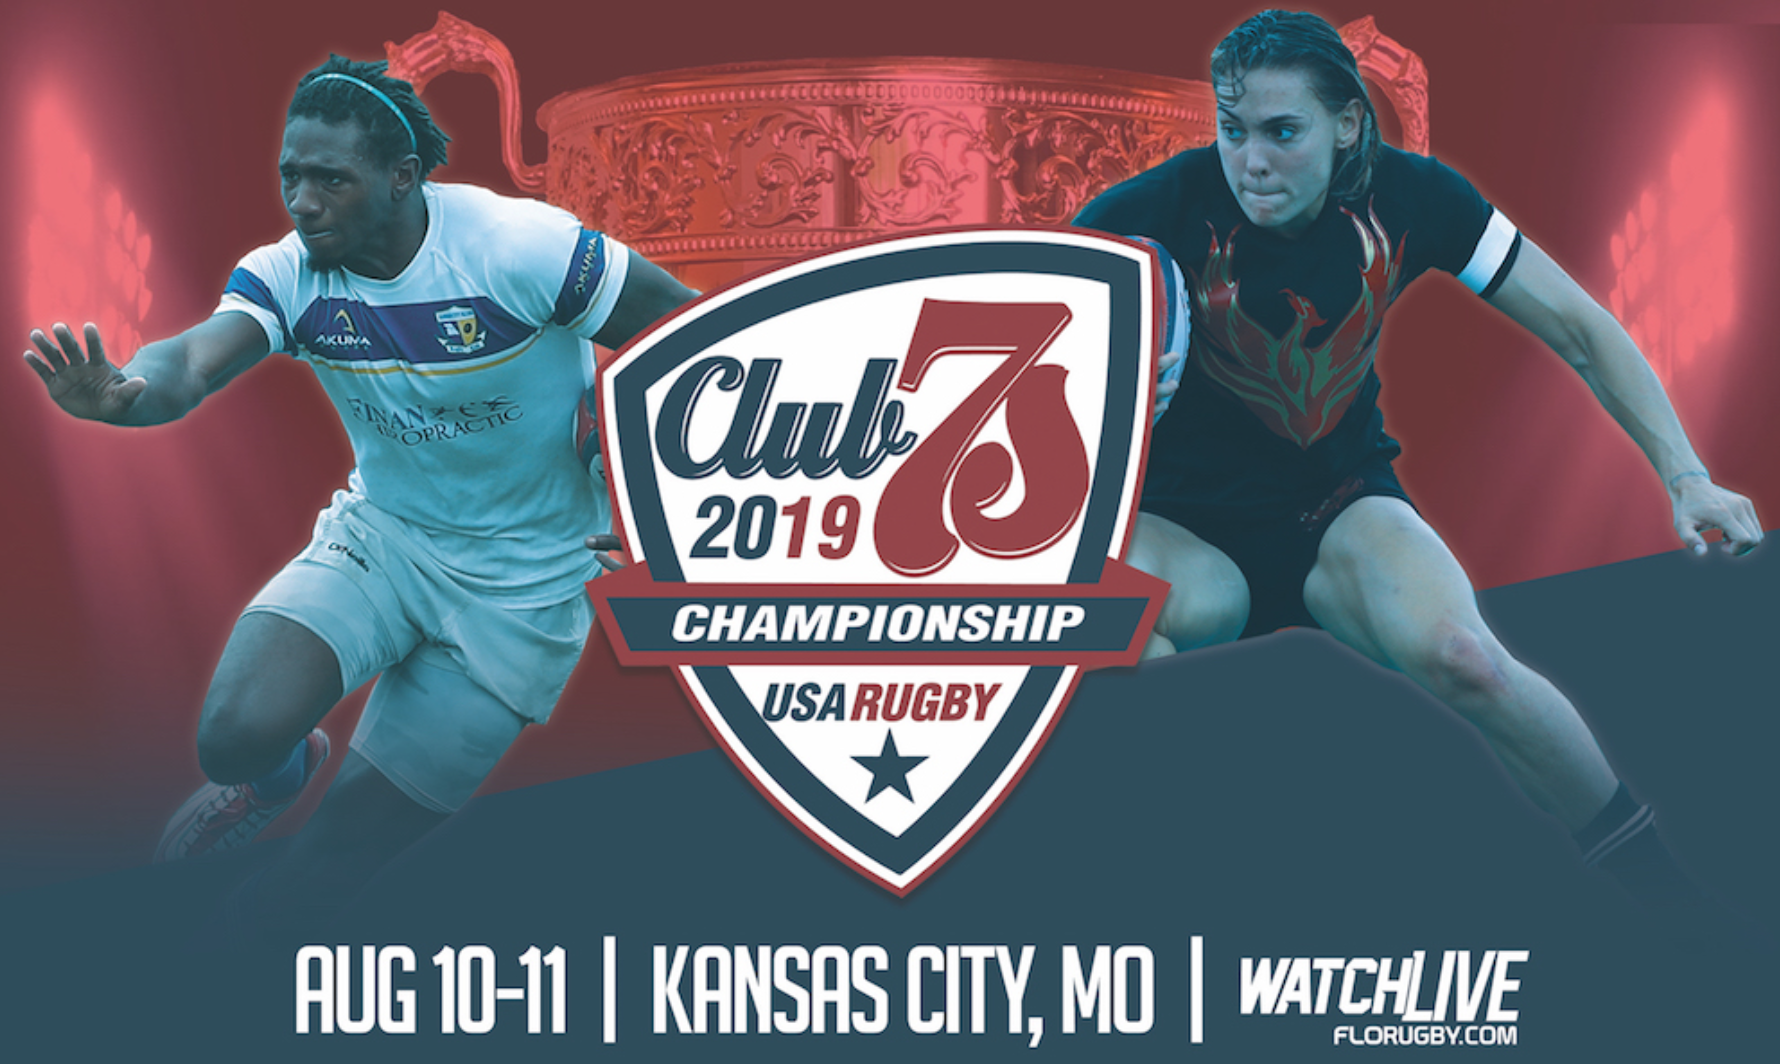 2019 USA Rugby Club 7s Lands in Kansas City Sporting Fields + Athletics